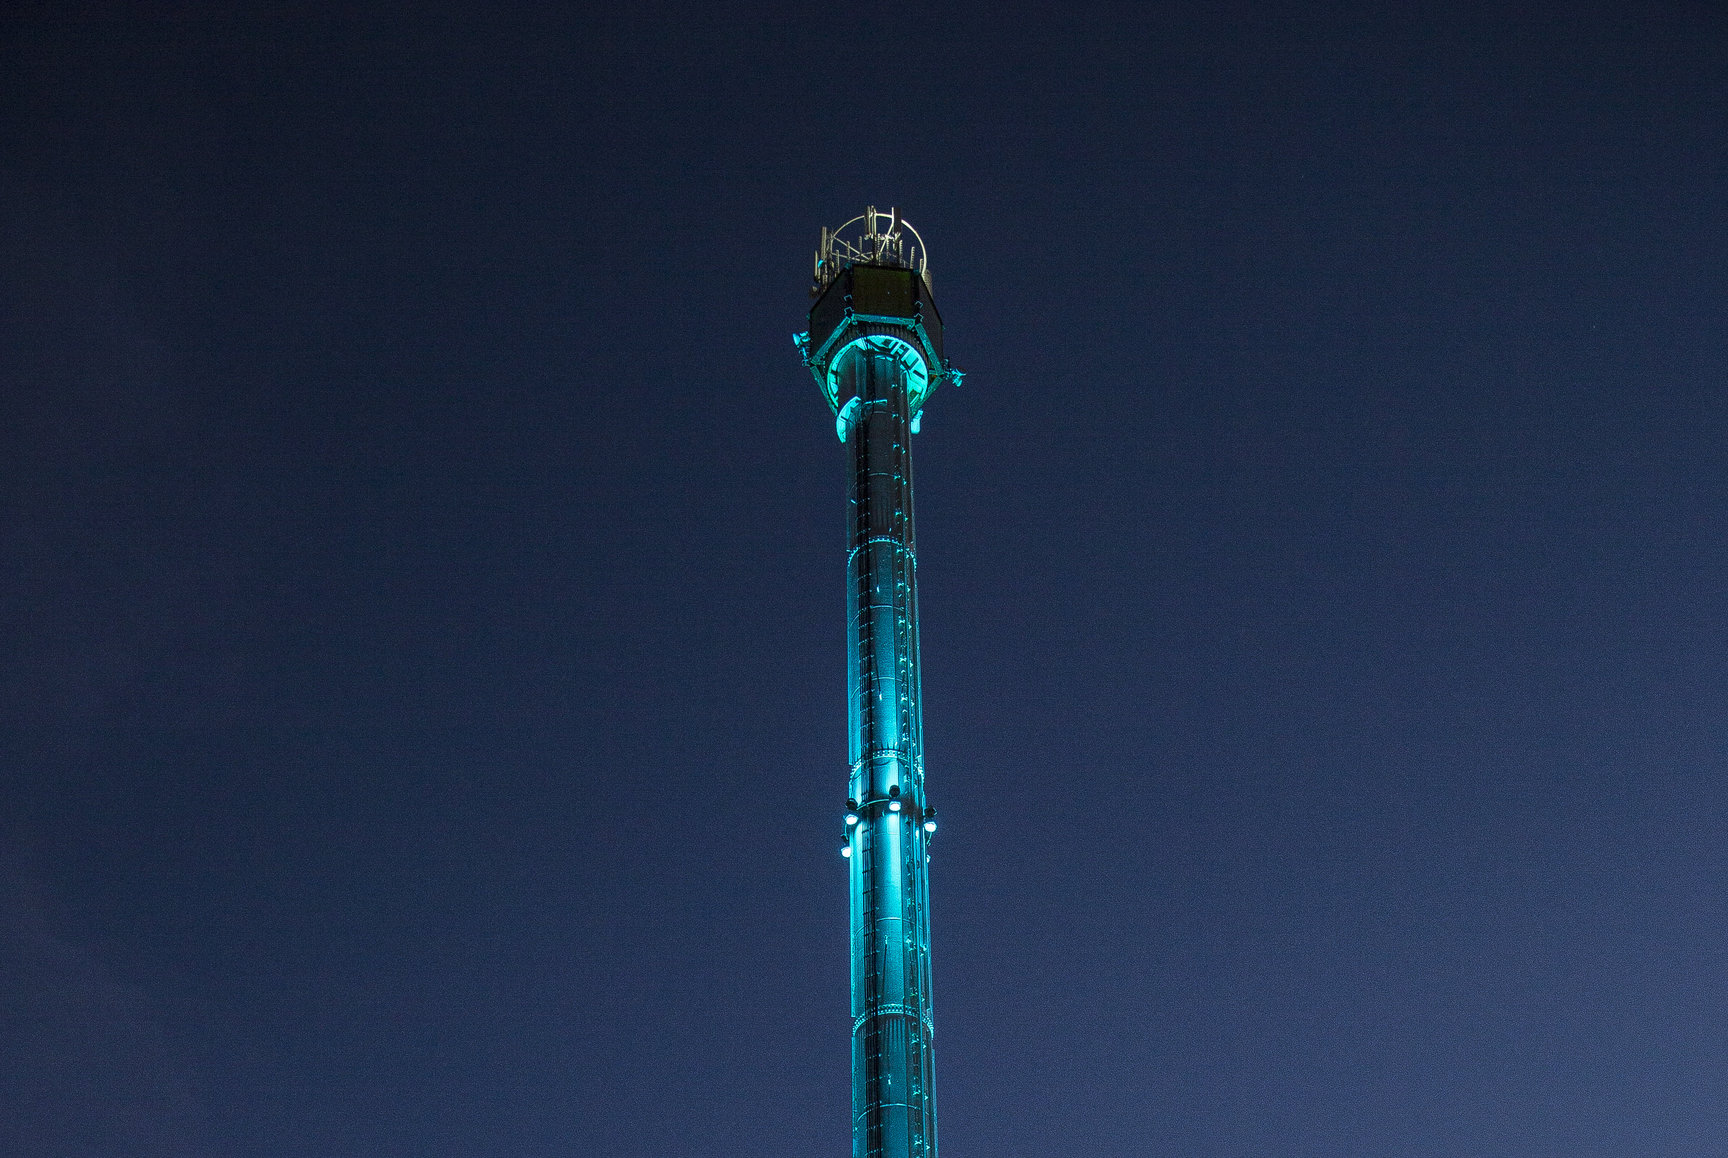 LTP Integration - Architectural Lighting for Structures - Rhyl Sky Tower